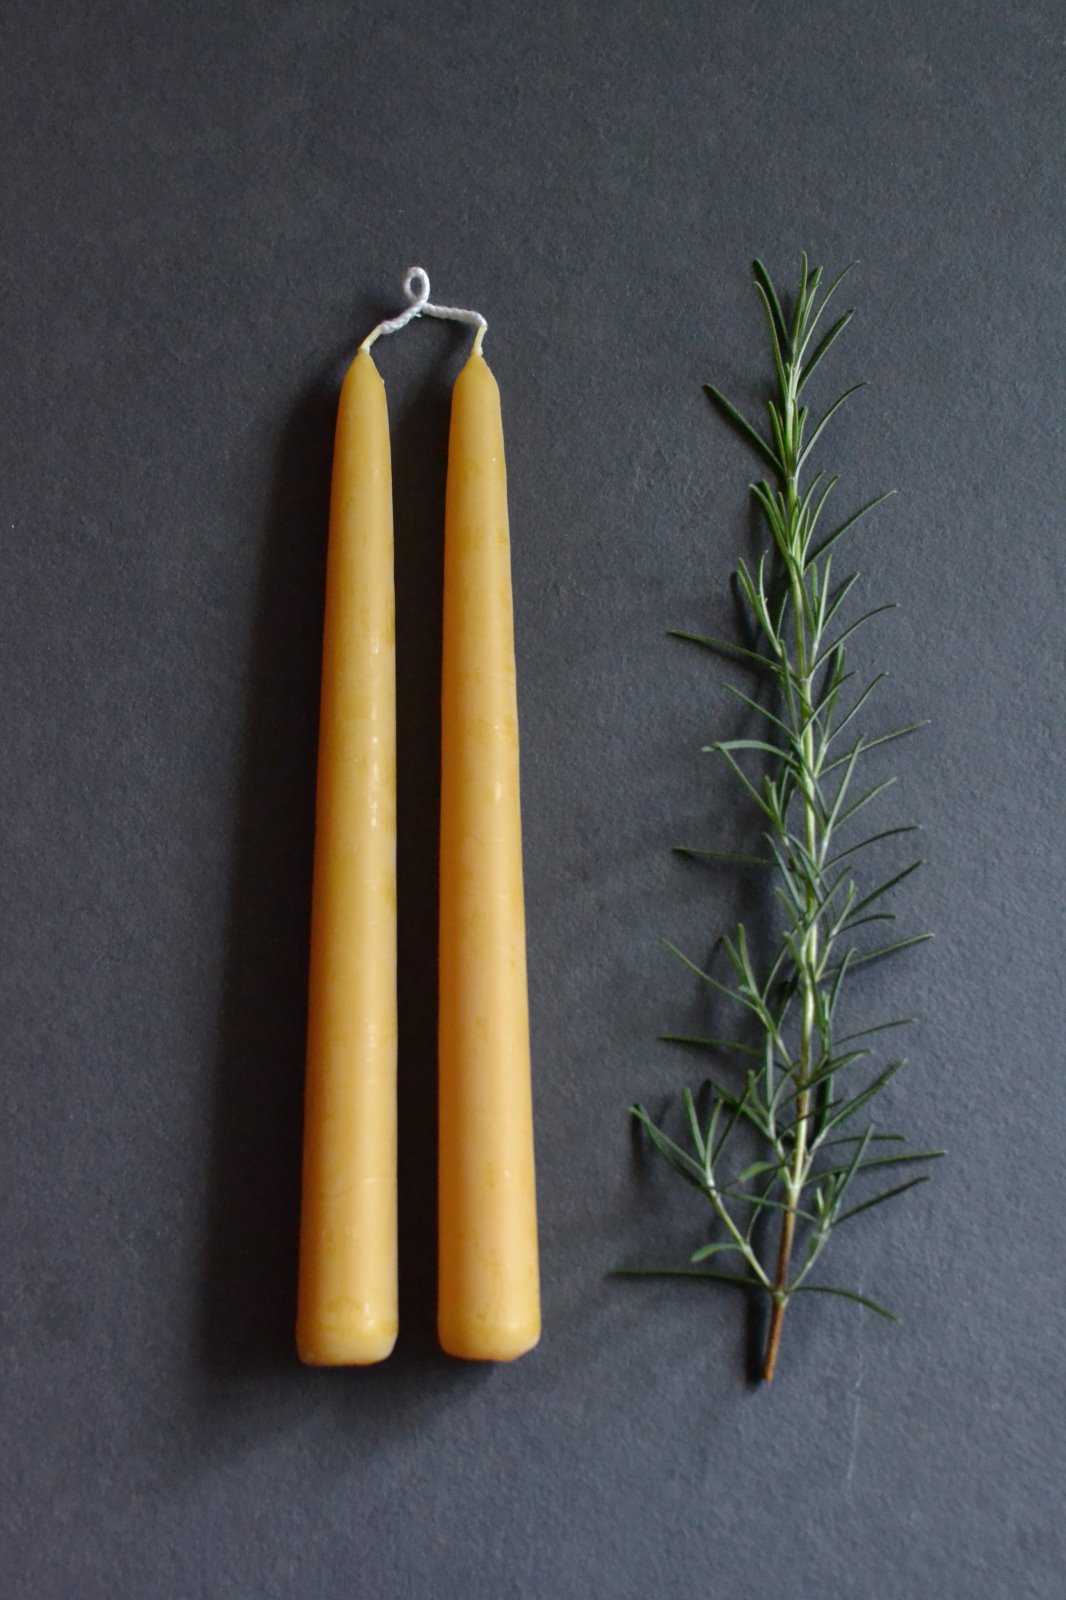 Pair of Beeswax Candles ú8.50 Decorator's Notebook